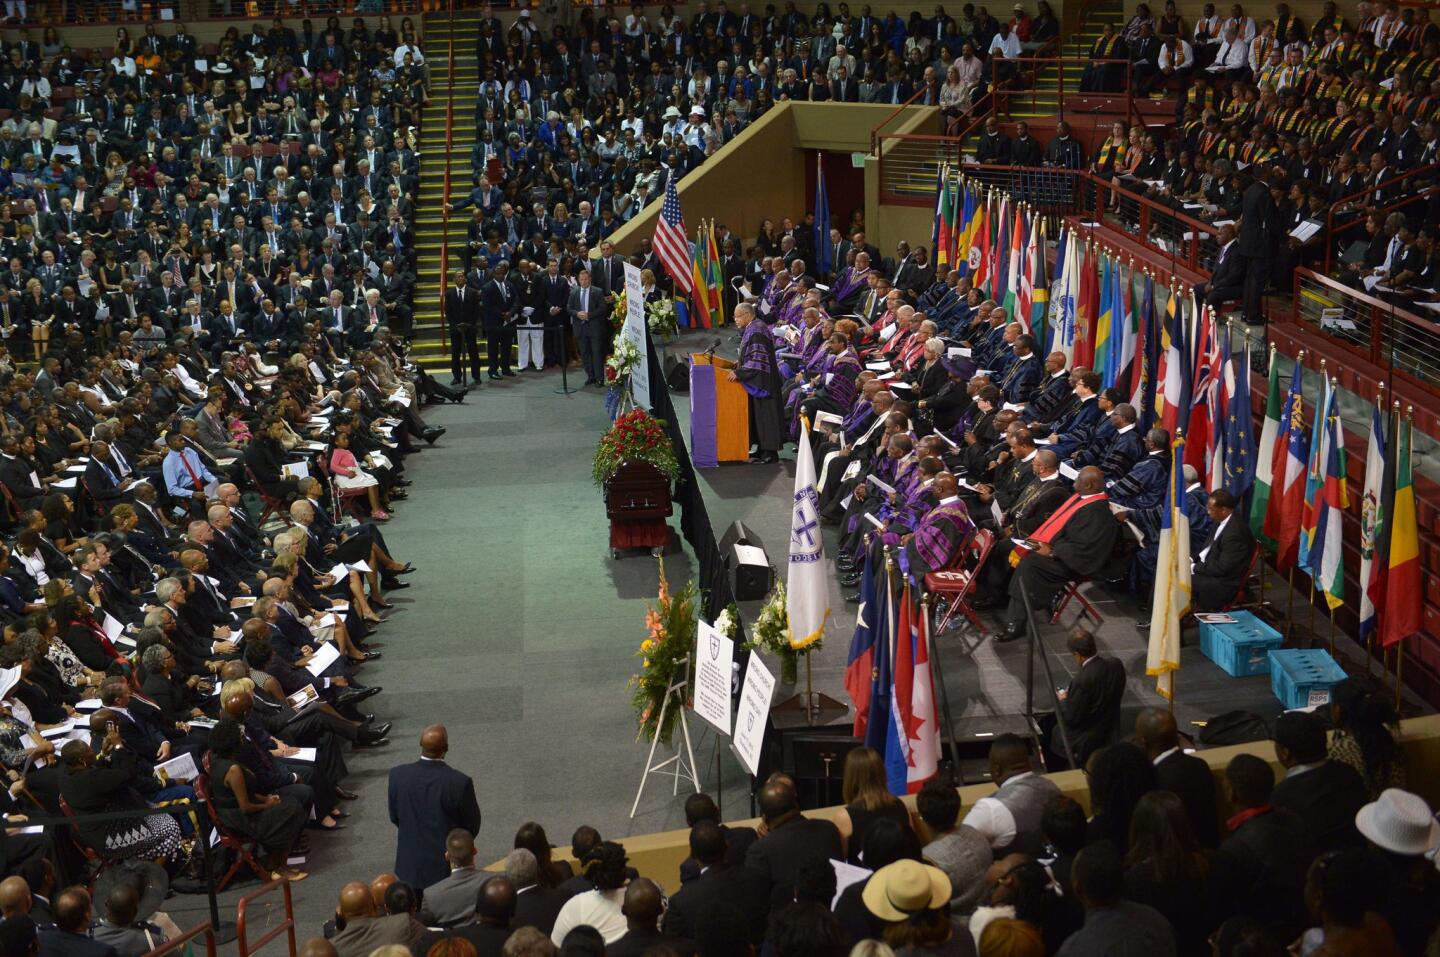 Thousands of mourners attended the funeral for South Carolina state senator and Rev. Clementa Pinckney at the College of Charleston TD Arena on June 26, 2015.